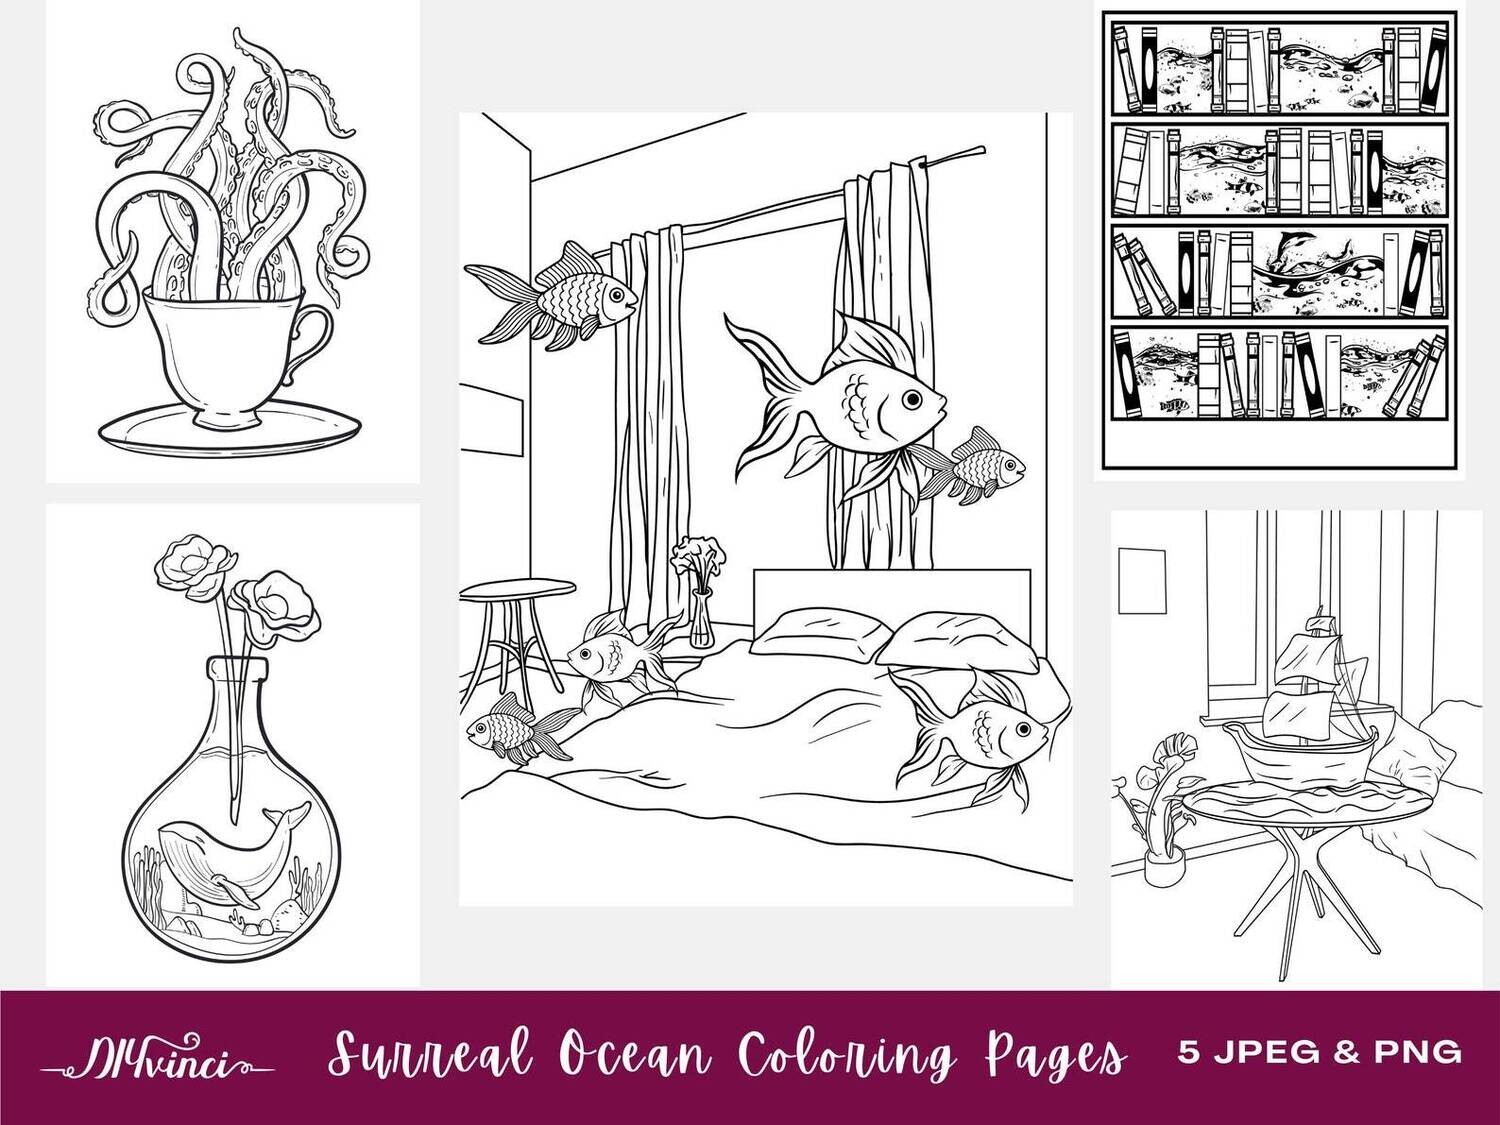 Surreal Ocean Printable Coloring Pages   JPEG & PNG   Personal and  Commercial Use